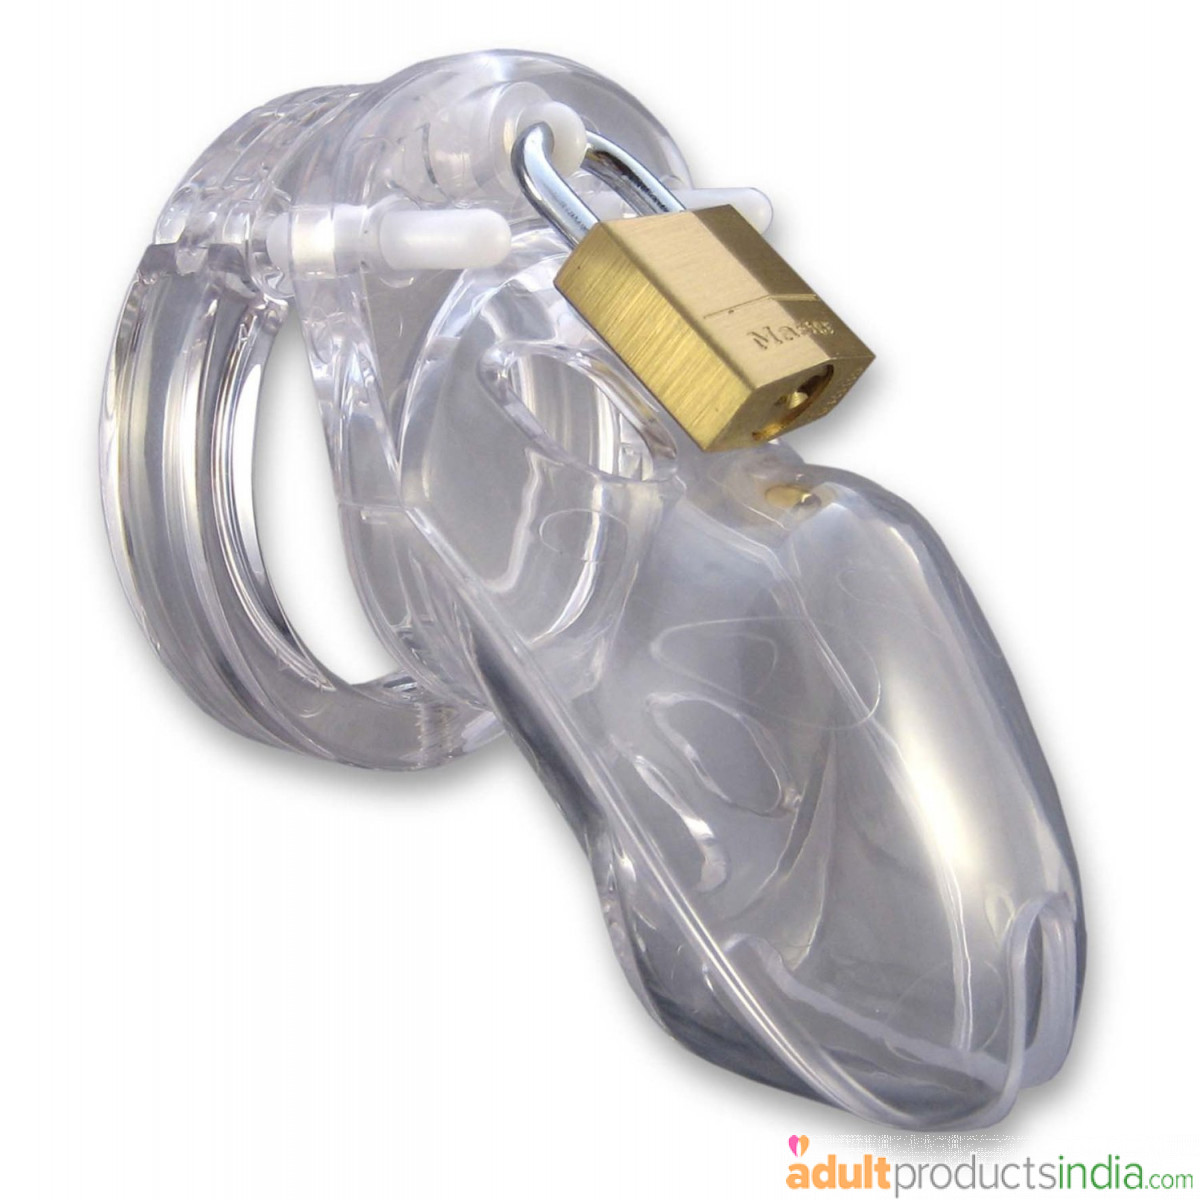 Plastic Penis Cage Chastity Penis Chastity Transparent Chastity belt for men